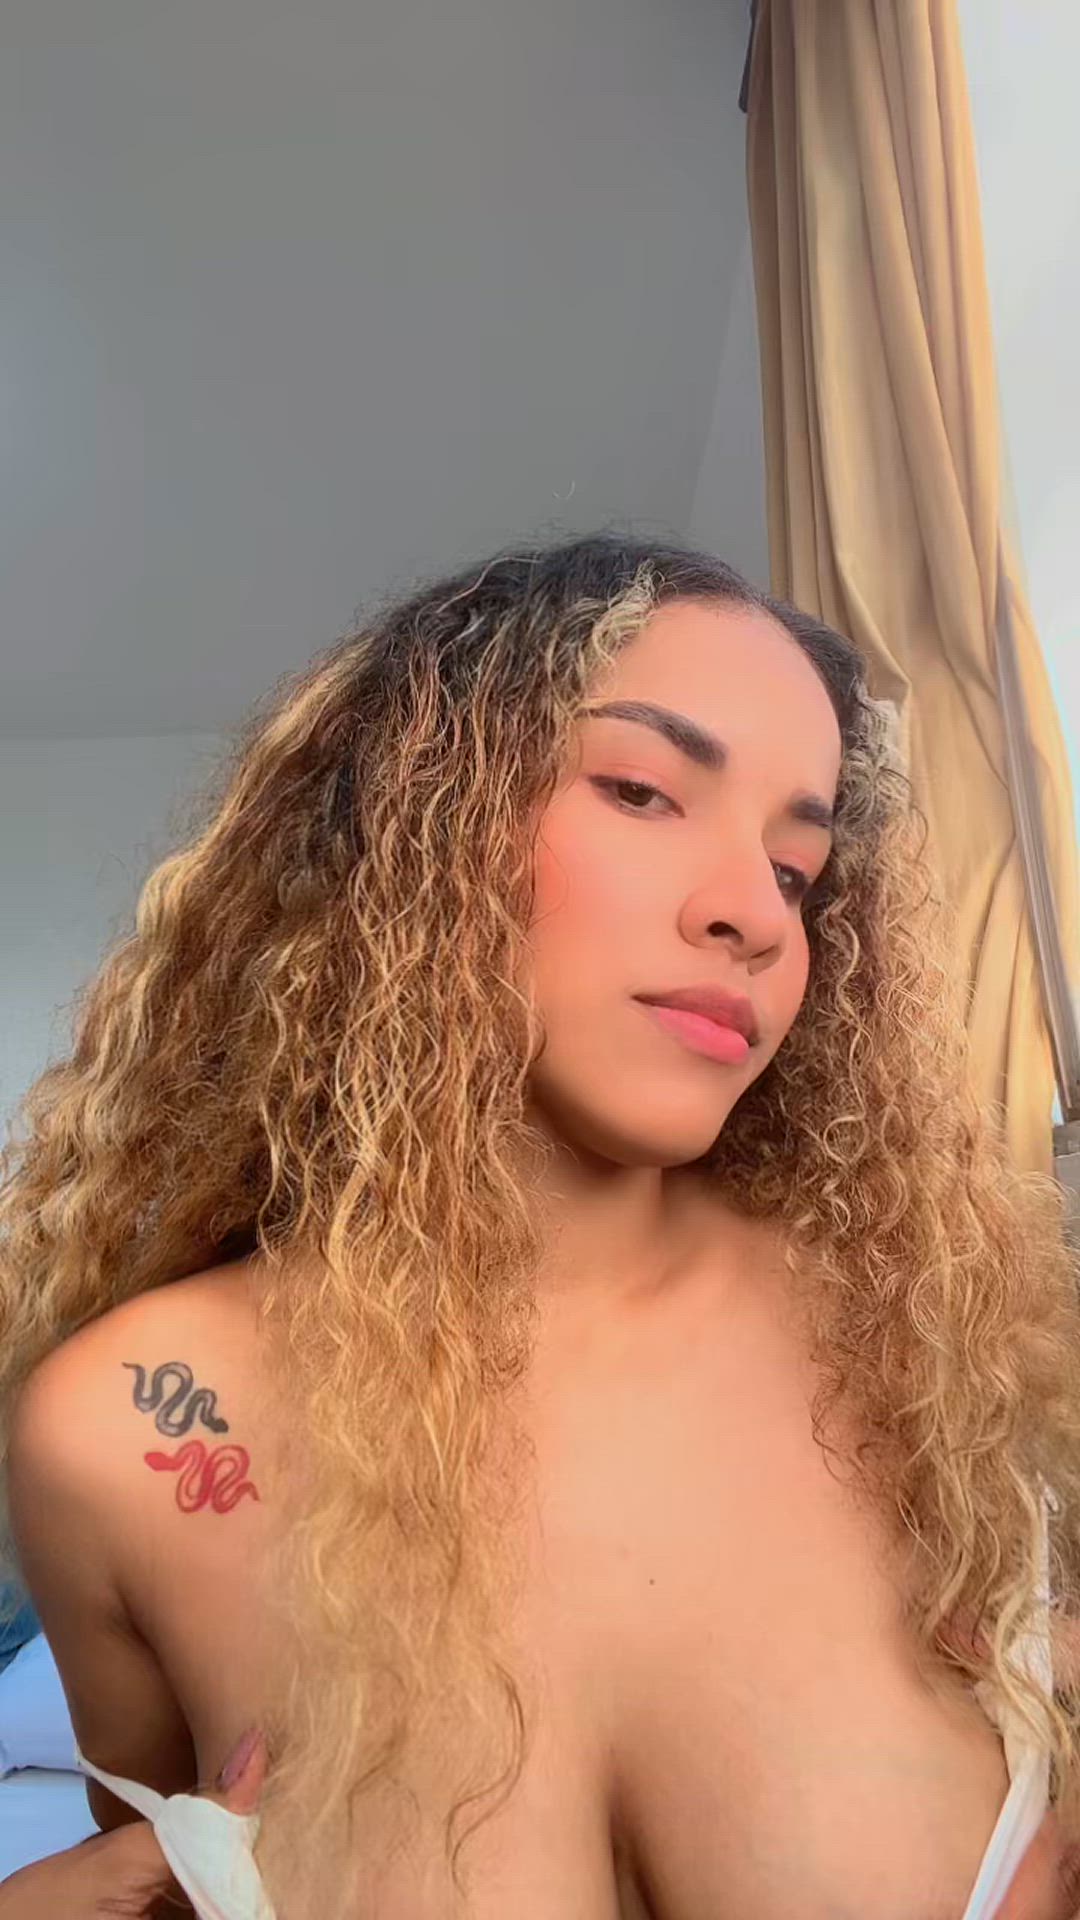 Boobs porn video with onlyfans model millyfraga <strong>@millyfraga</strong>